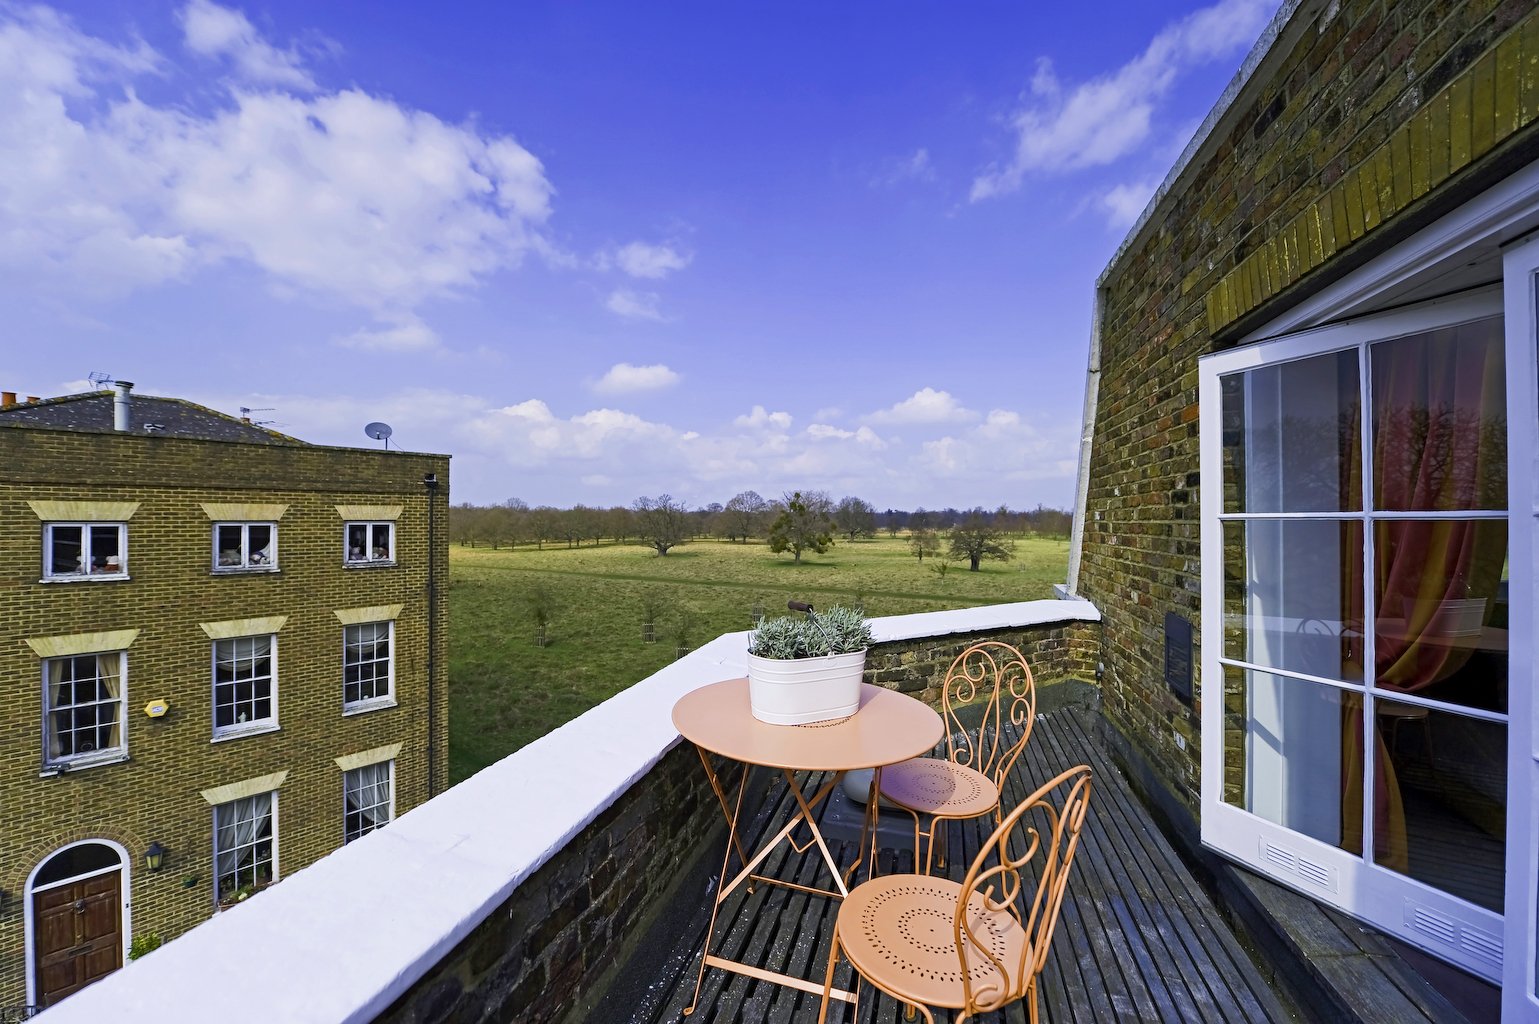 Kingston-Accommodation-West-London-available-from-today!-Book-luxury-Serviced-Apartments-in-Kingston-upon-Thames-with-Urban-Stay-now!-All-bills-included!!-+44-(0)-208-691-3920